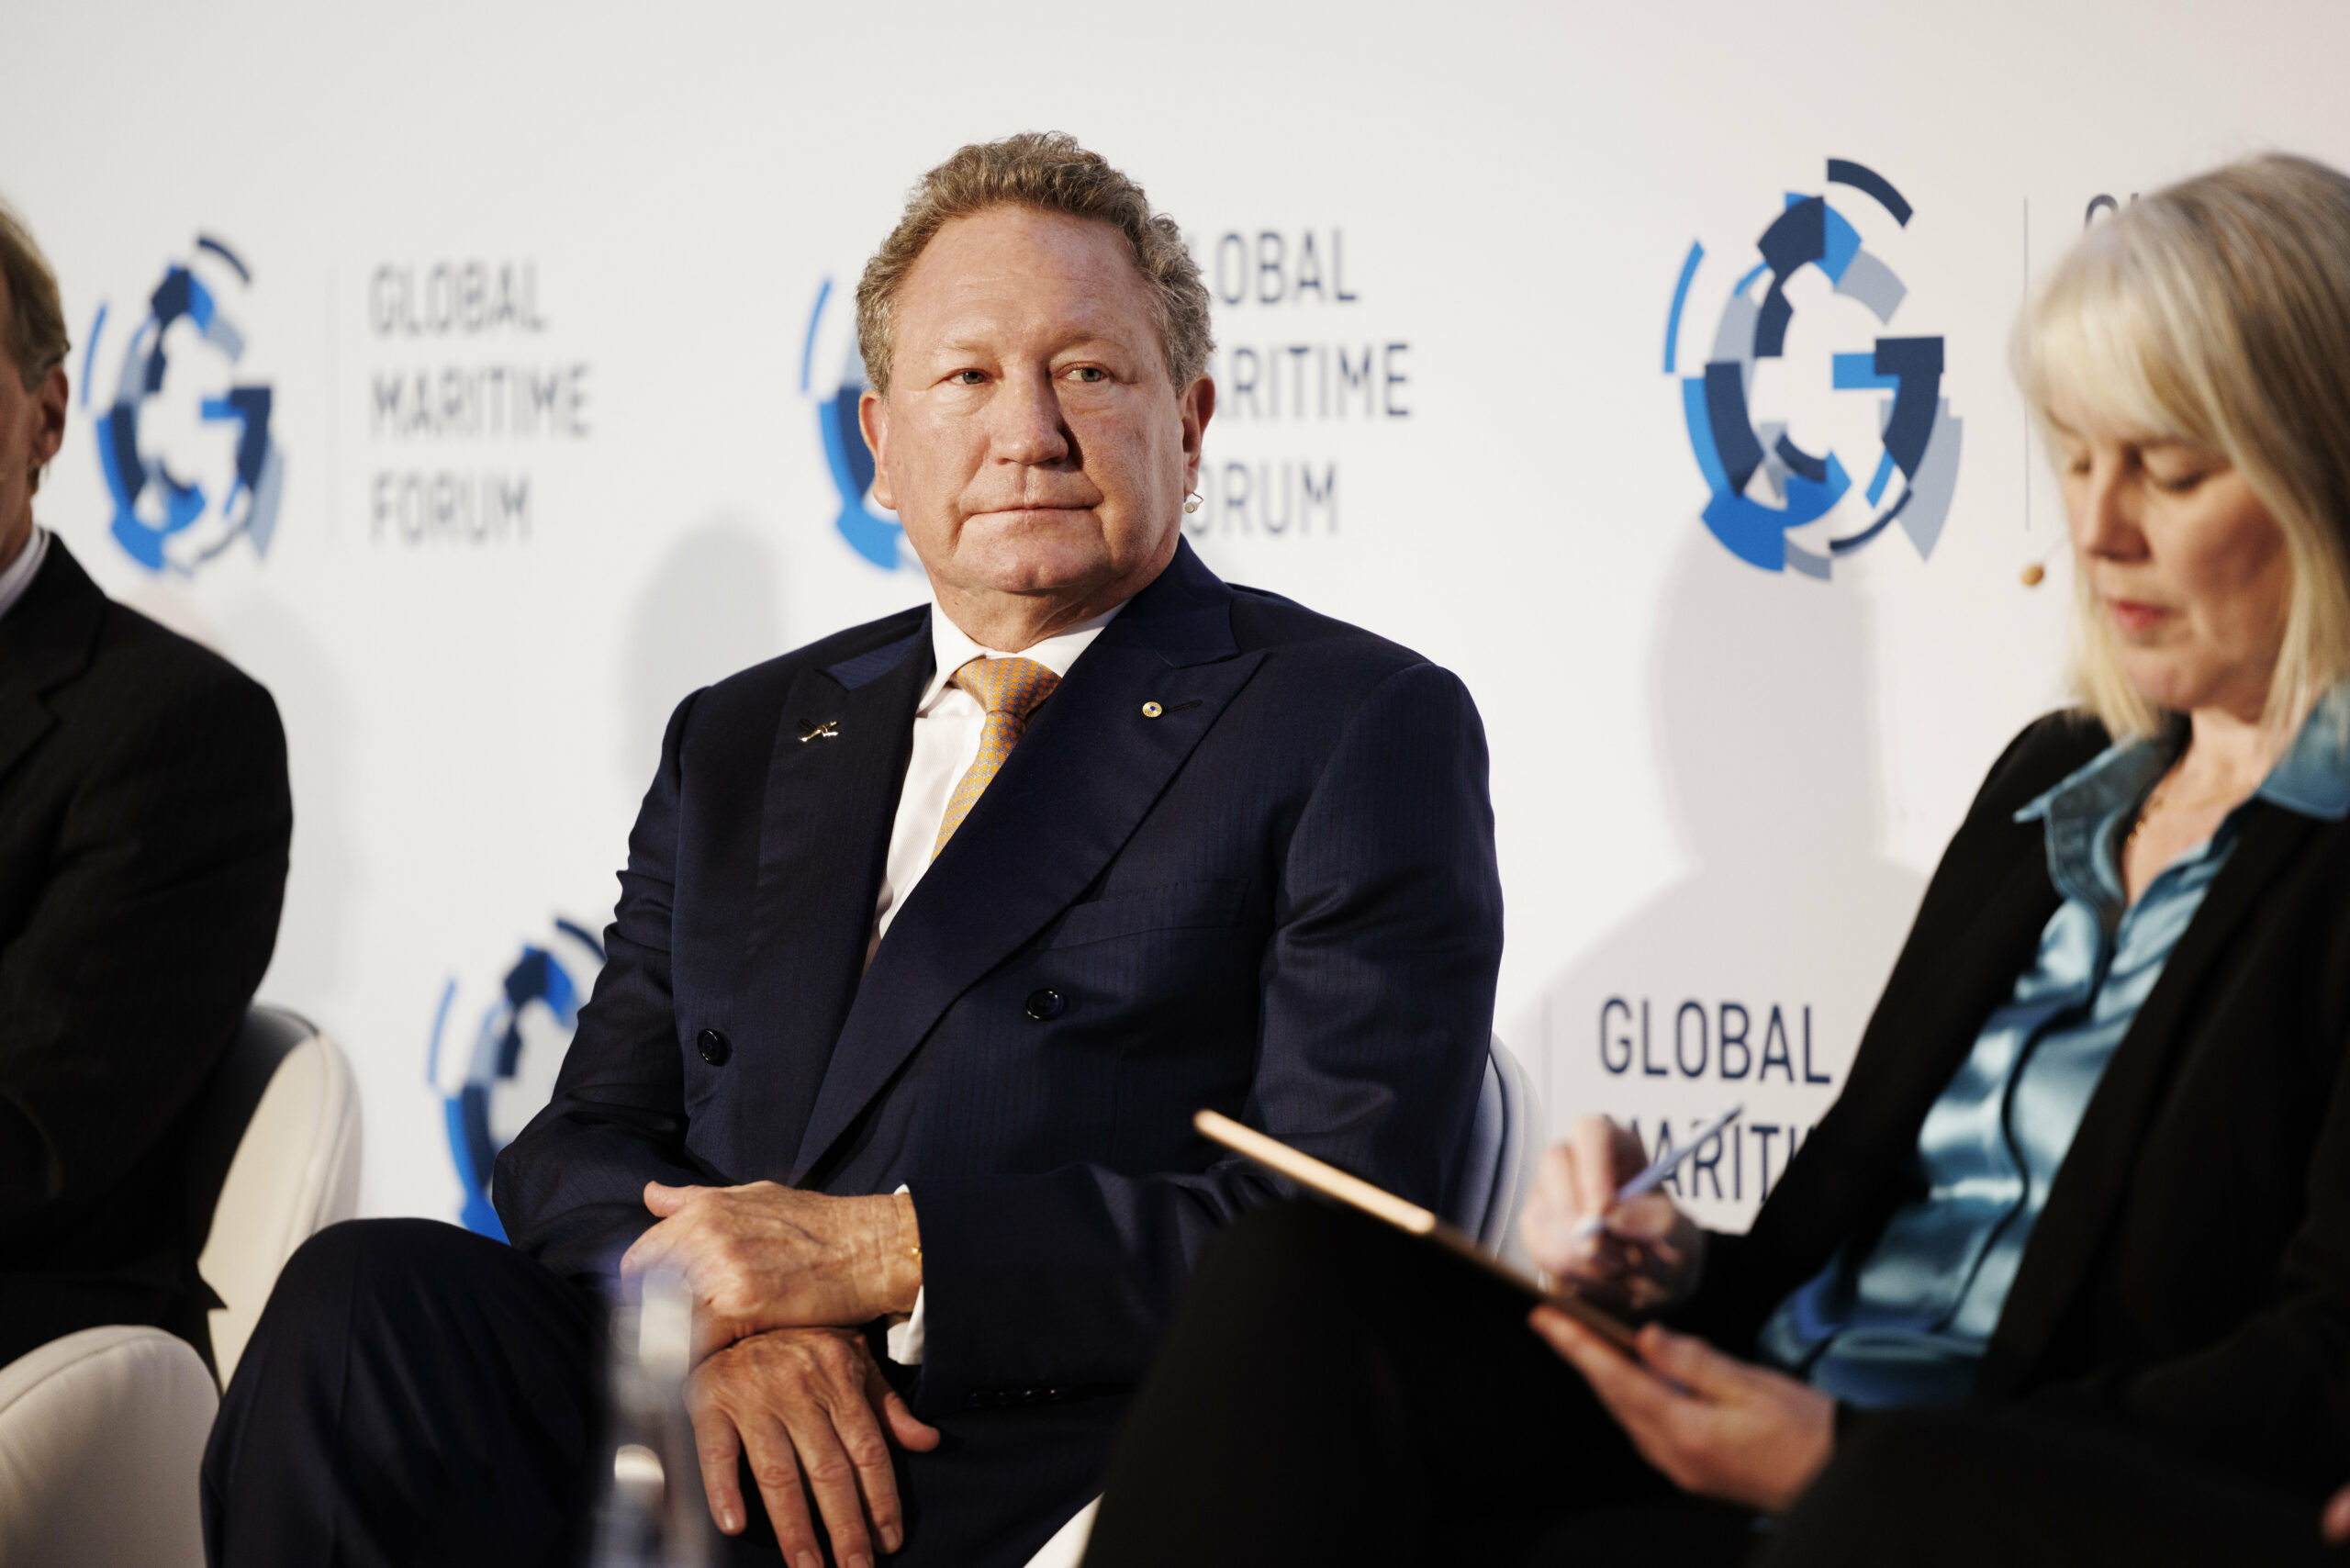 A man in a suit sits in front of a backdrop for an event as a woman with a clipboard sits in the foreground, out of focus